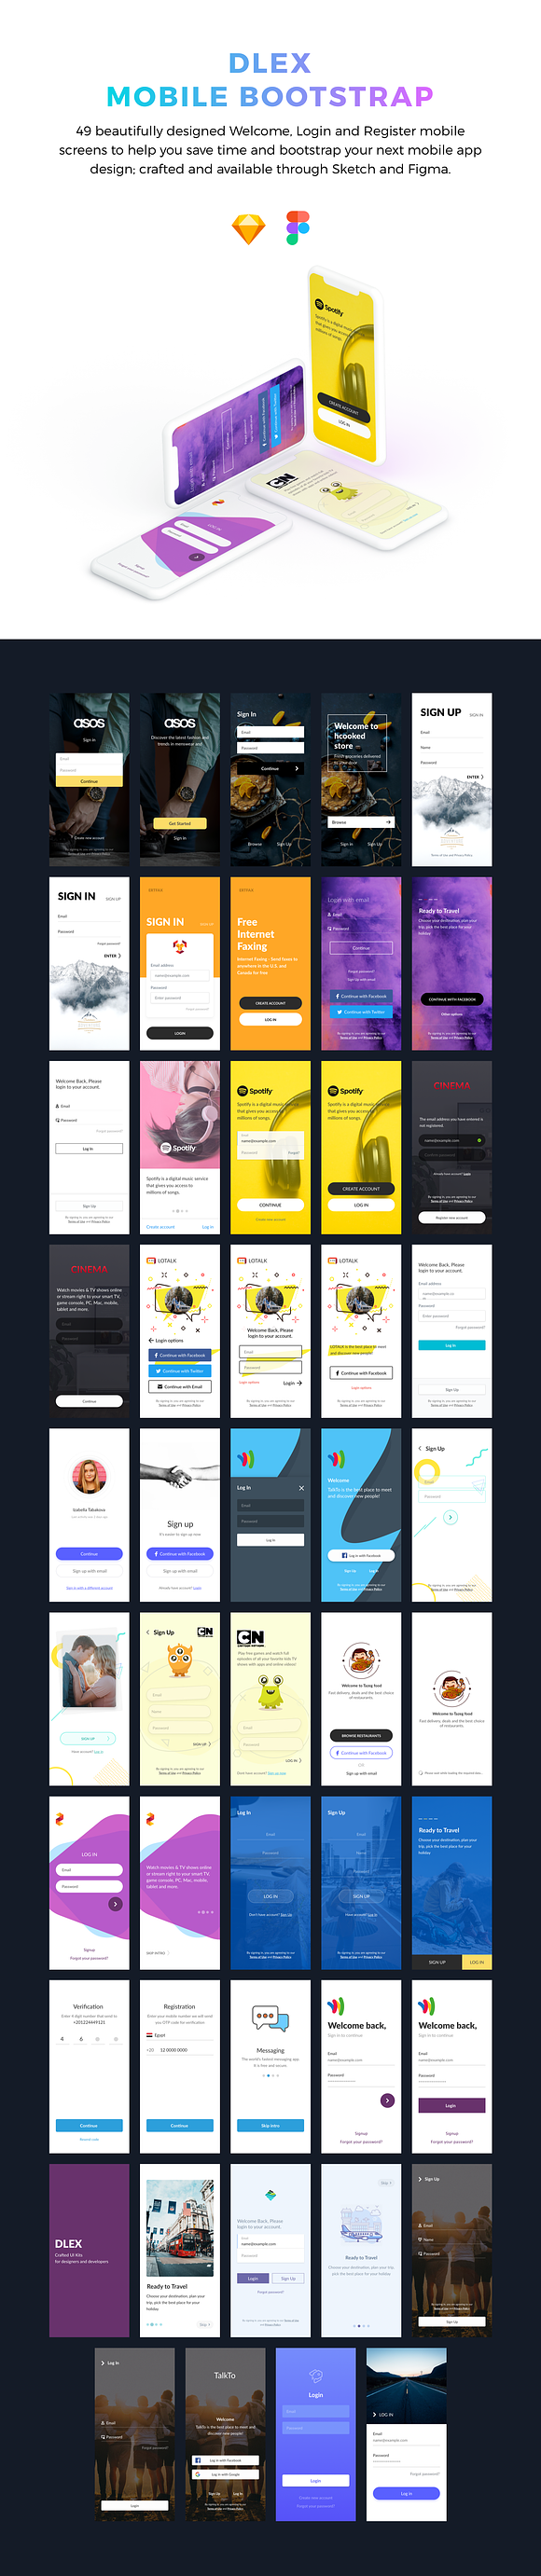 Dlex Mobile Bootstrap in UI Kits and Libraries - product preview 1